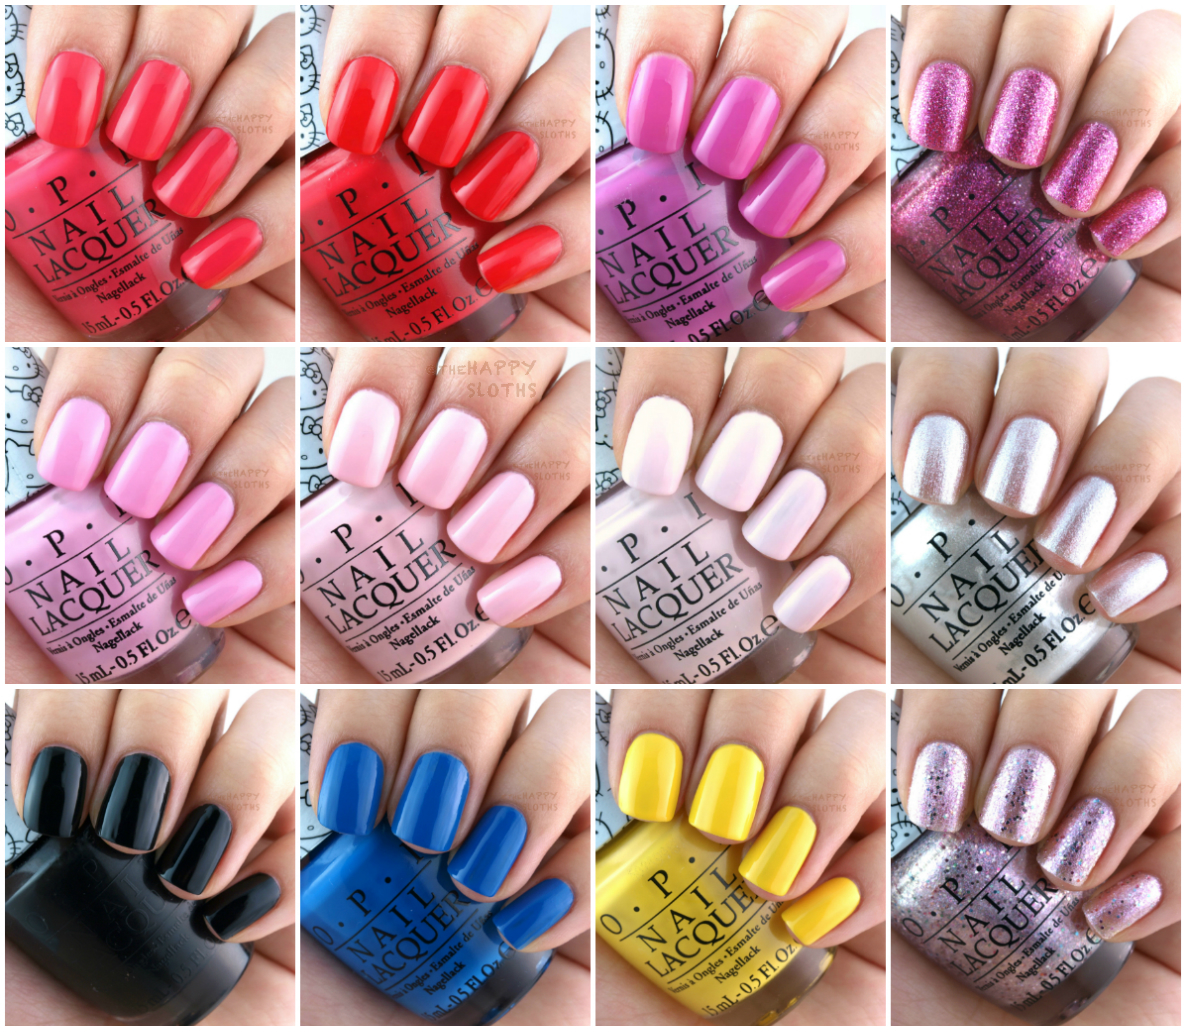 OPI Hello Kitty Collection: Review and Swatches | The Happy Sloths ...